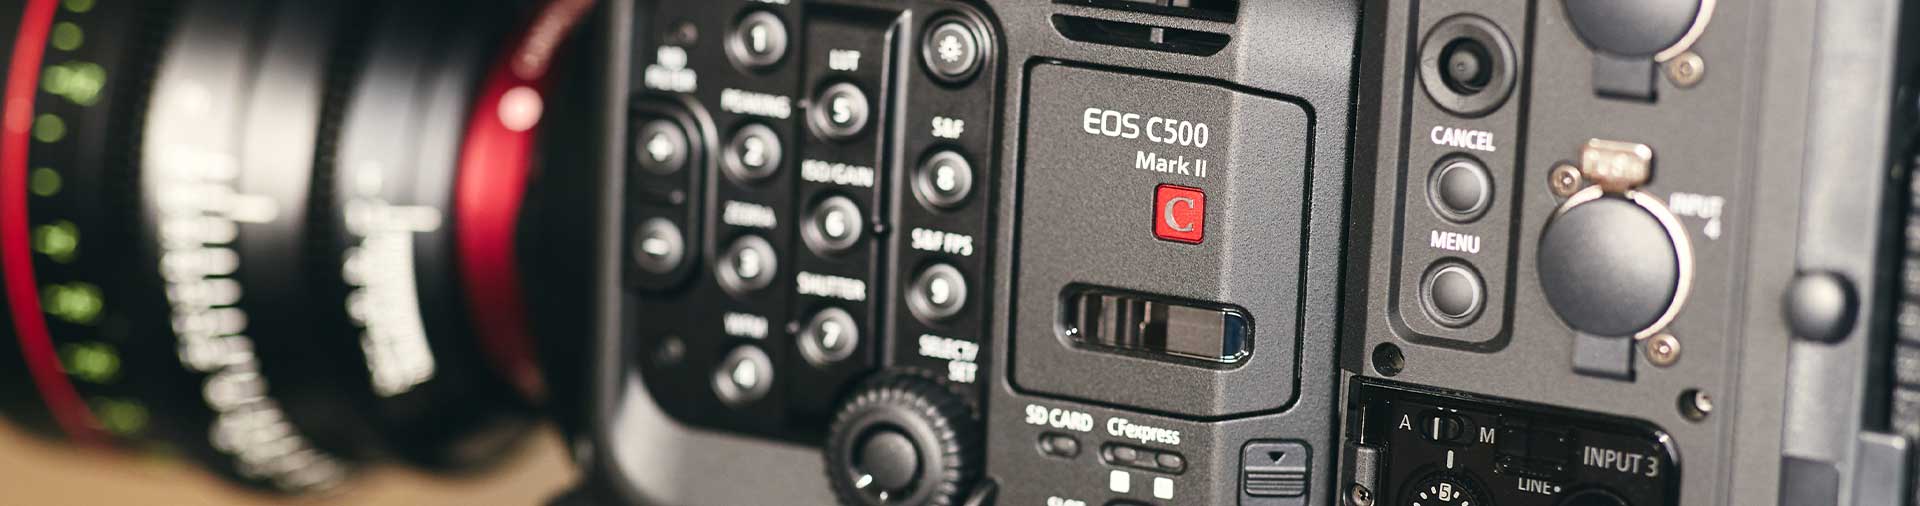 detail-of-the-canon-eos-c500-mark-ii-showing side-button-panel